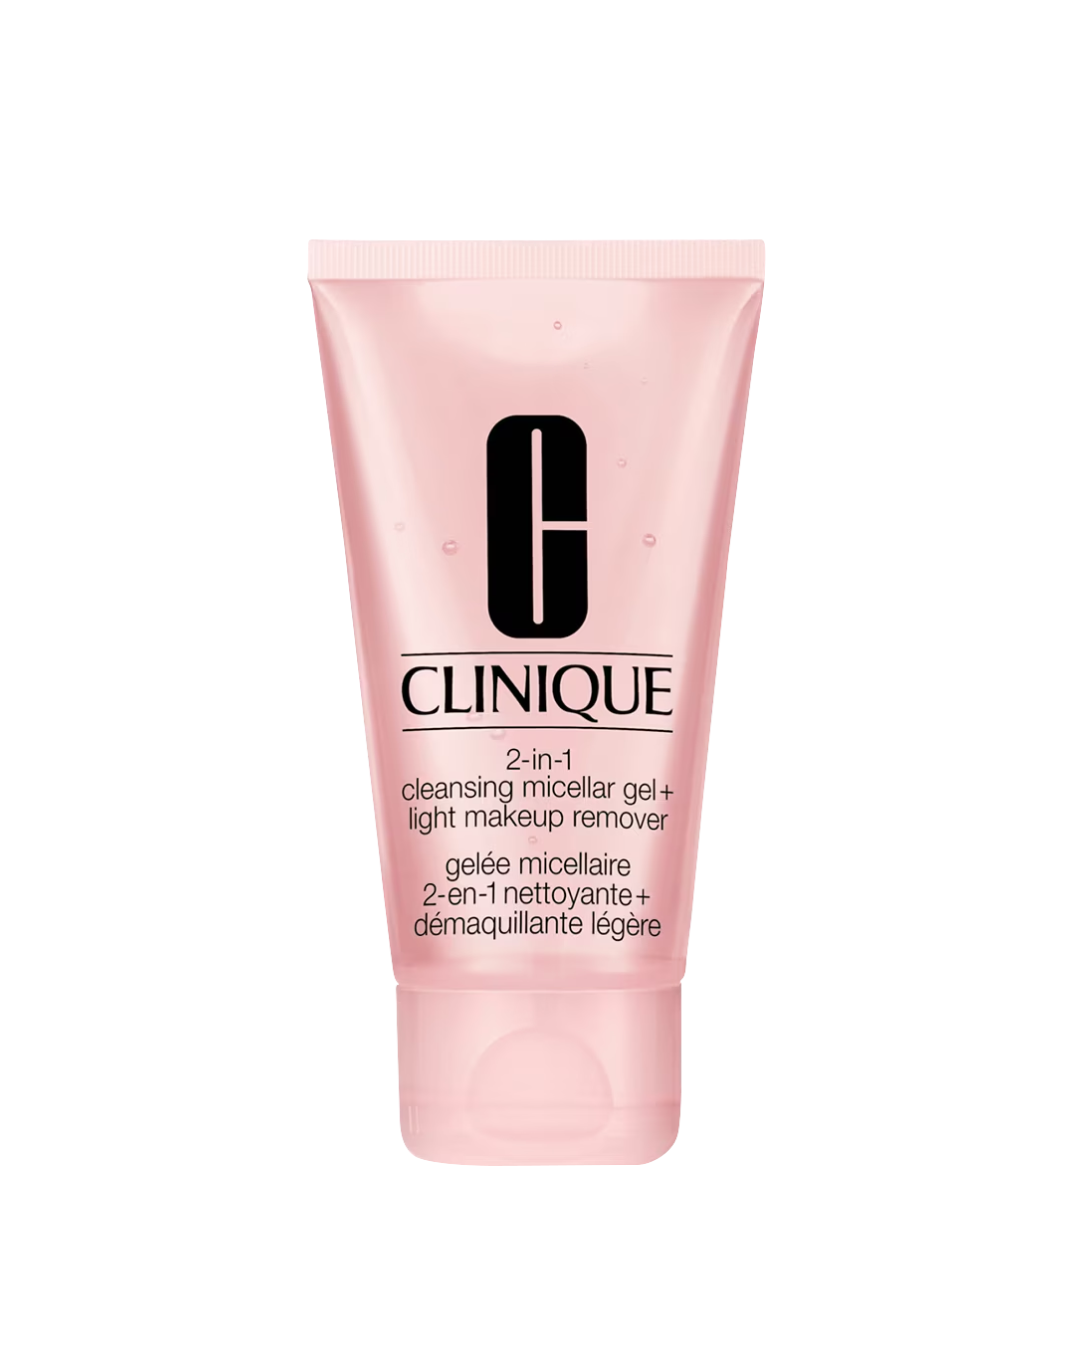 Clinique 2-in-1 Cleansing Micellar Gel + Light Makeup Remover (30ml) - Best Buy World Philippines